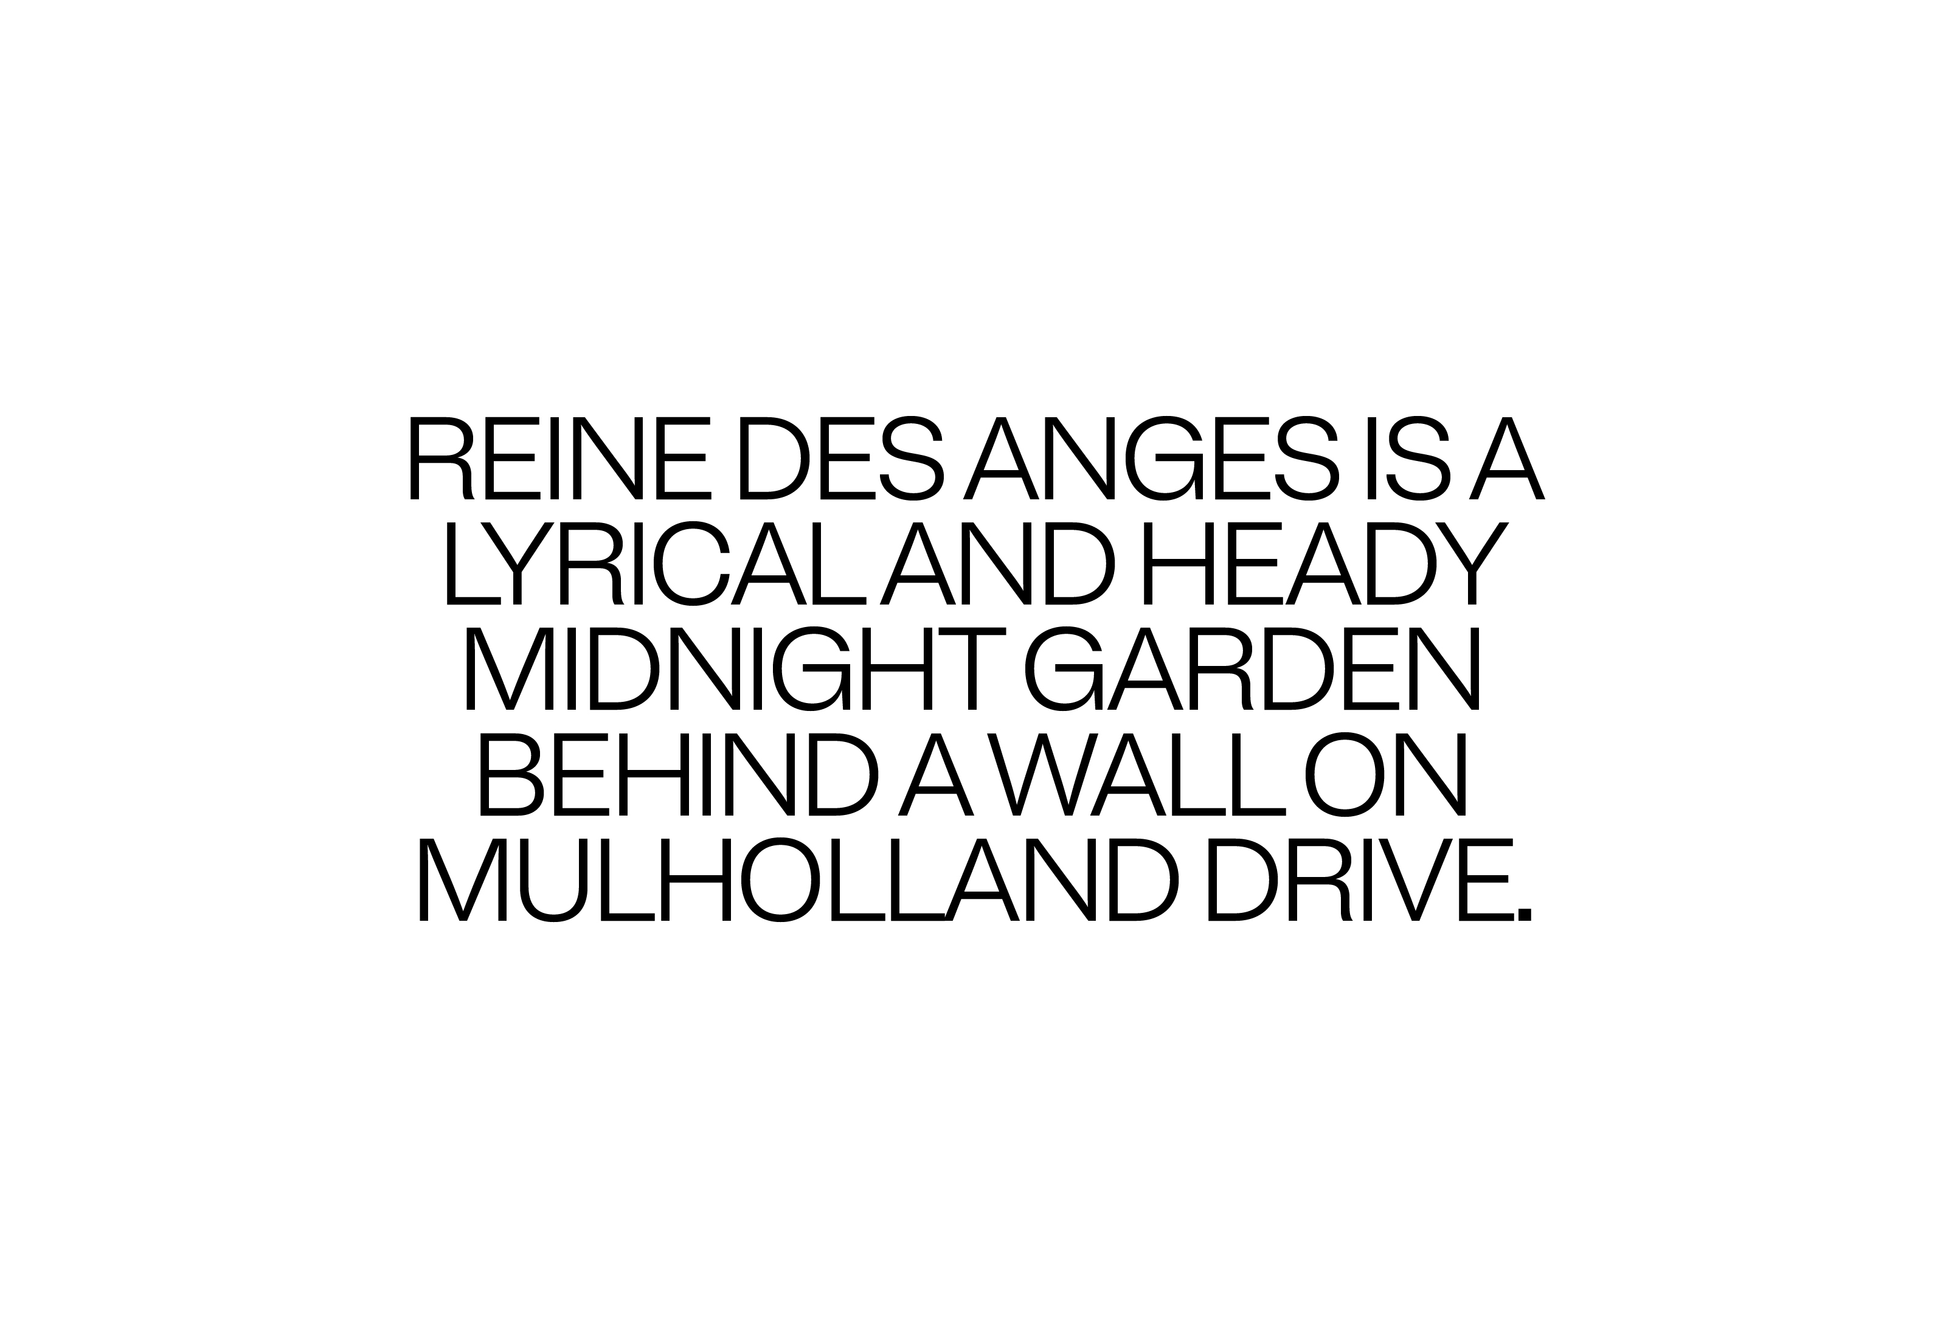 Reine des Anges is a lyrical and heady midnight garden behind a wall on Mulholland Drive.